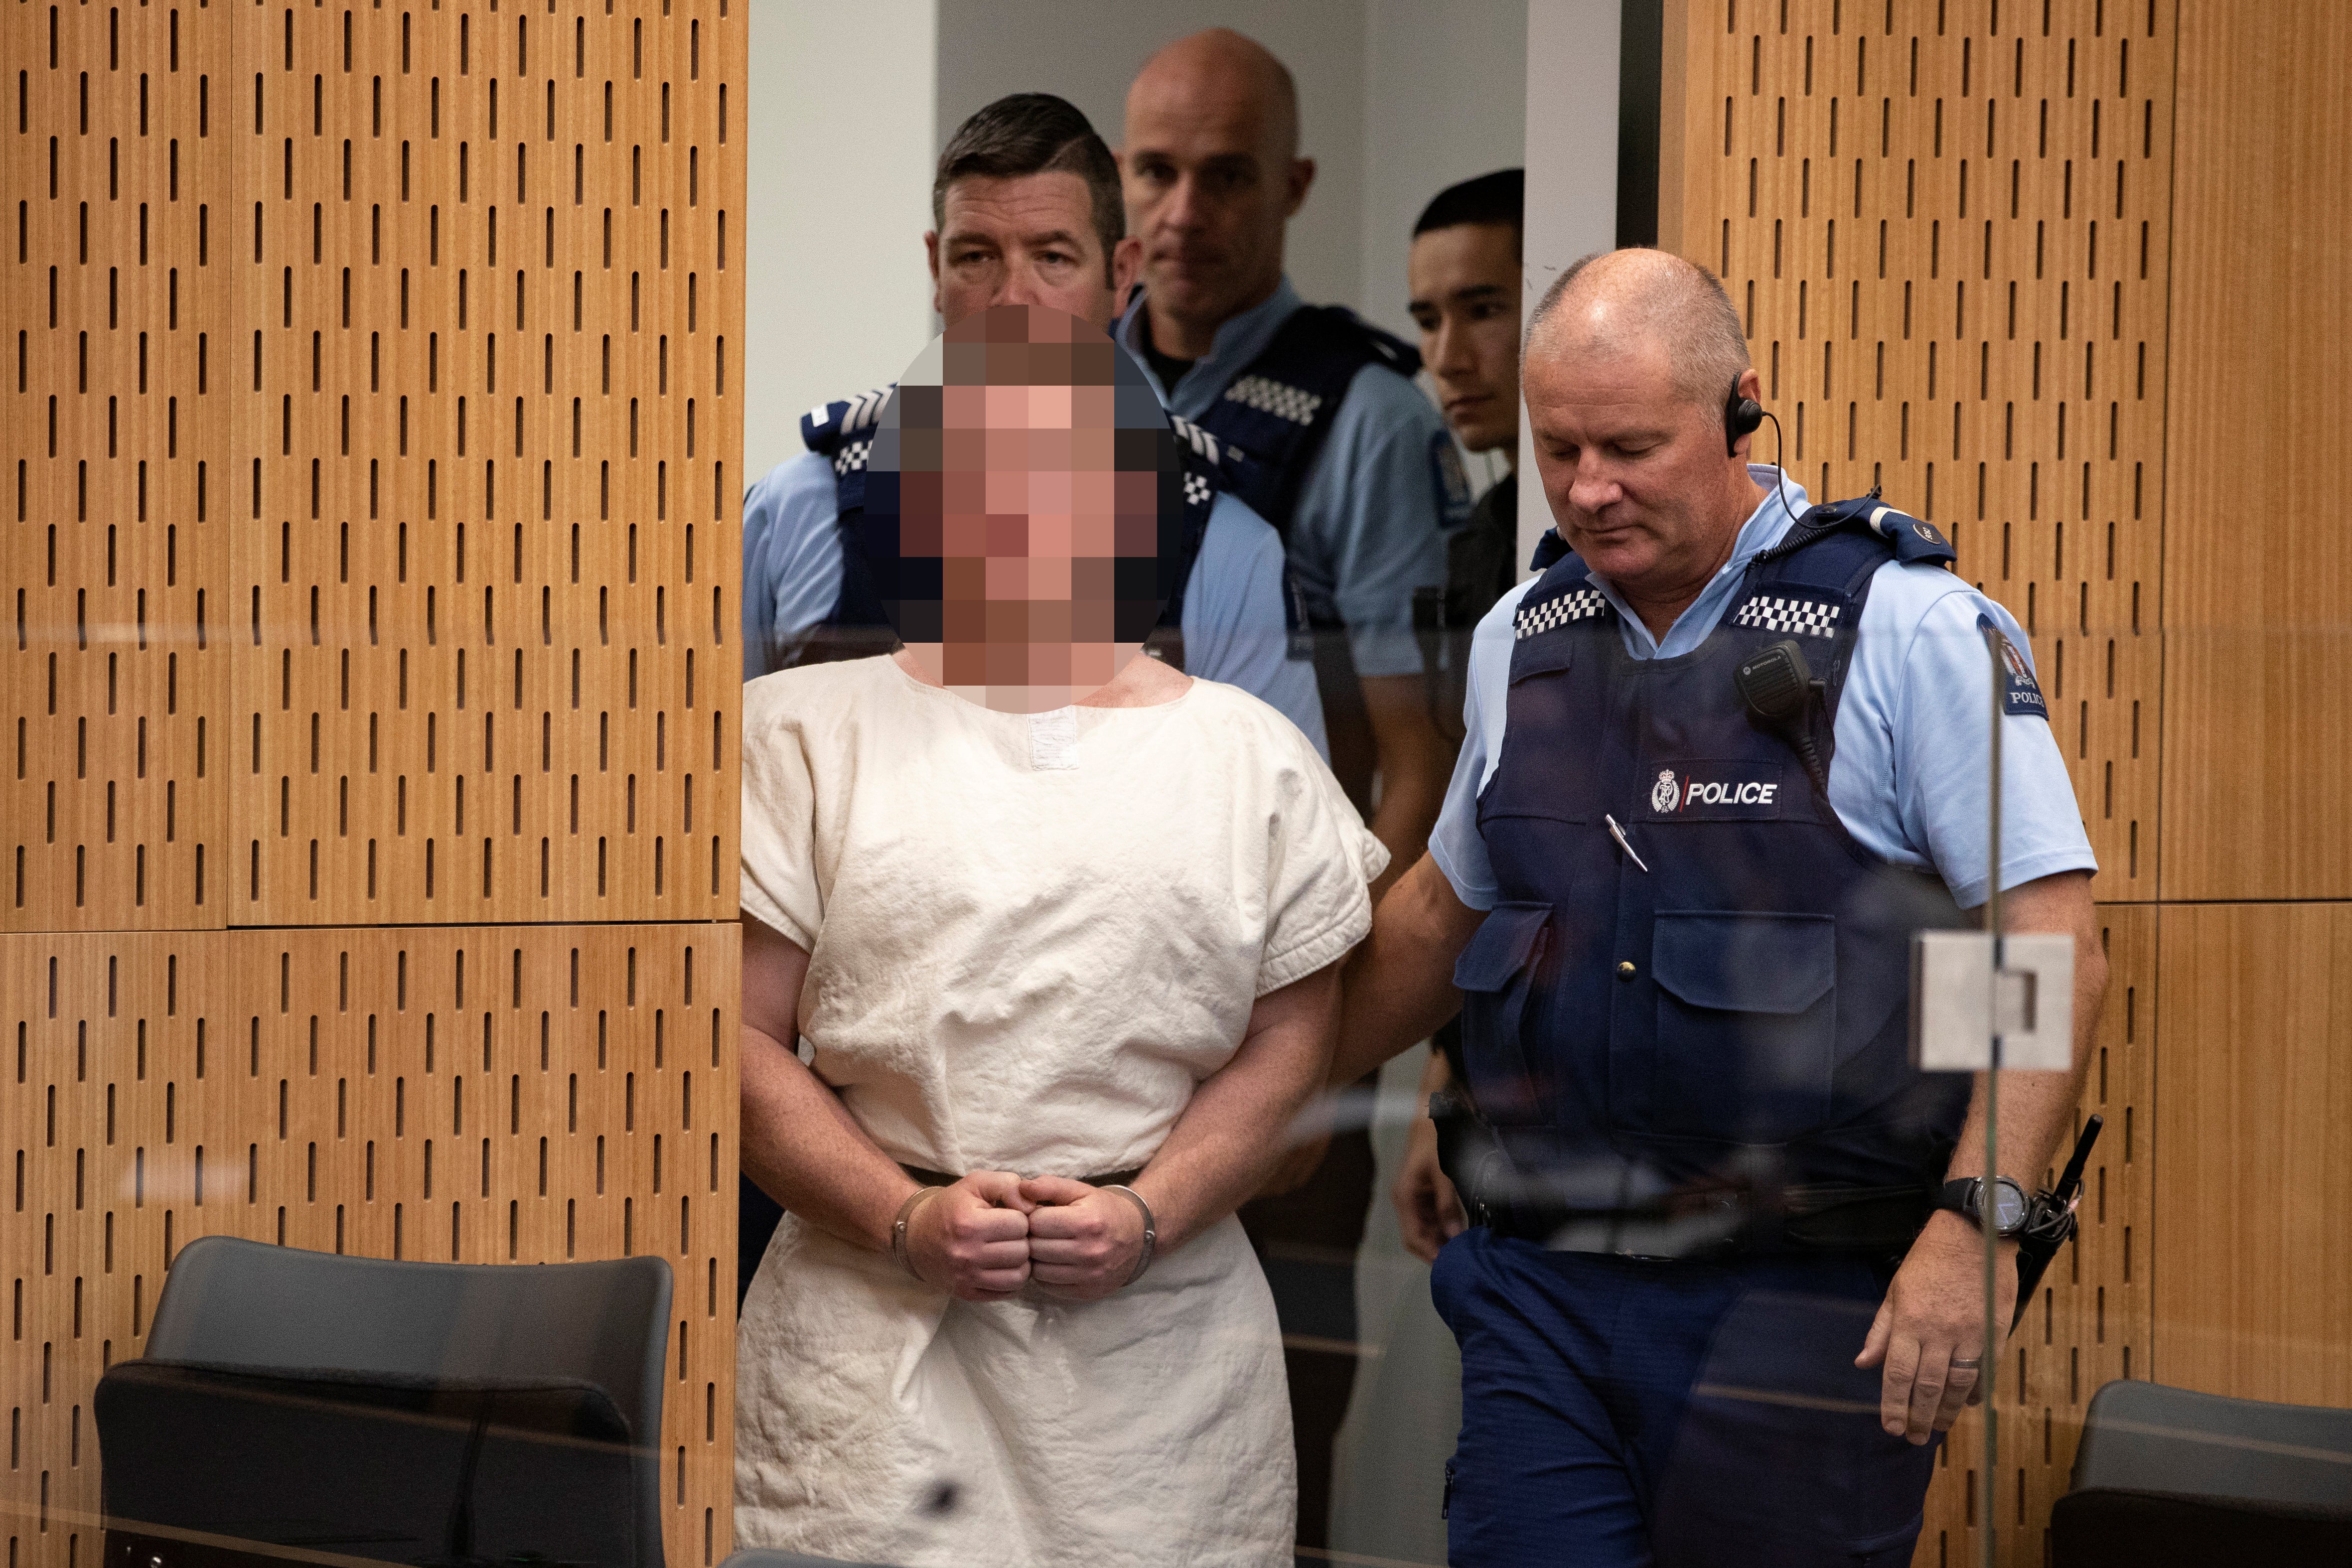 Brenton Tarrant, charged for murder in relation to the mosque attacks, is lead into the dock for his appearance in the Christchurch District Court, New Zealand March 16, 2019. 